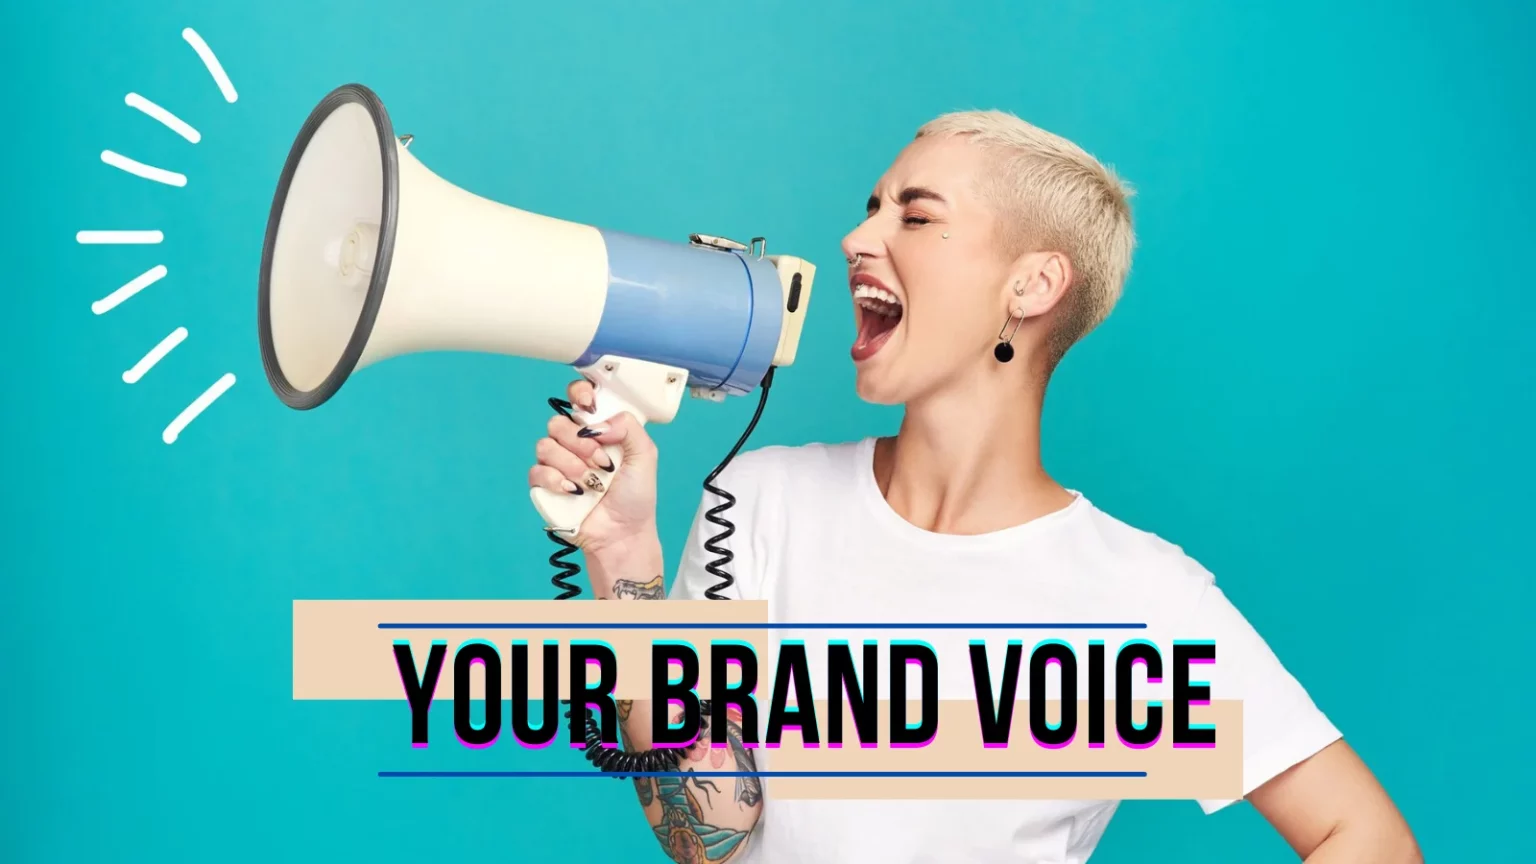 know-your-brand-voice-for-insta-caption